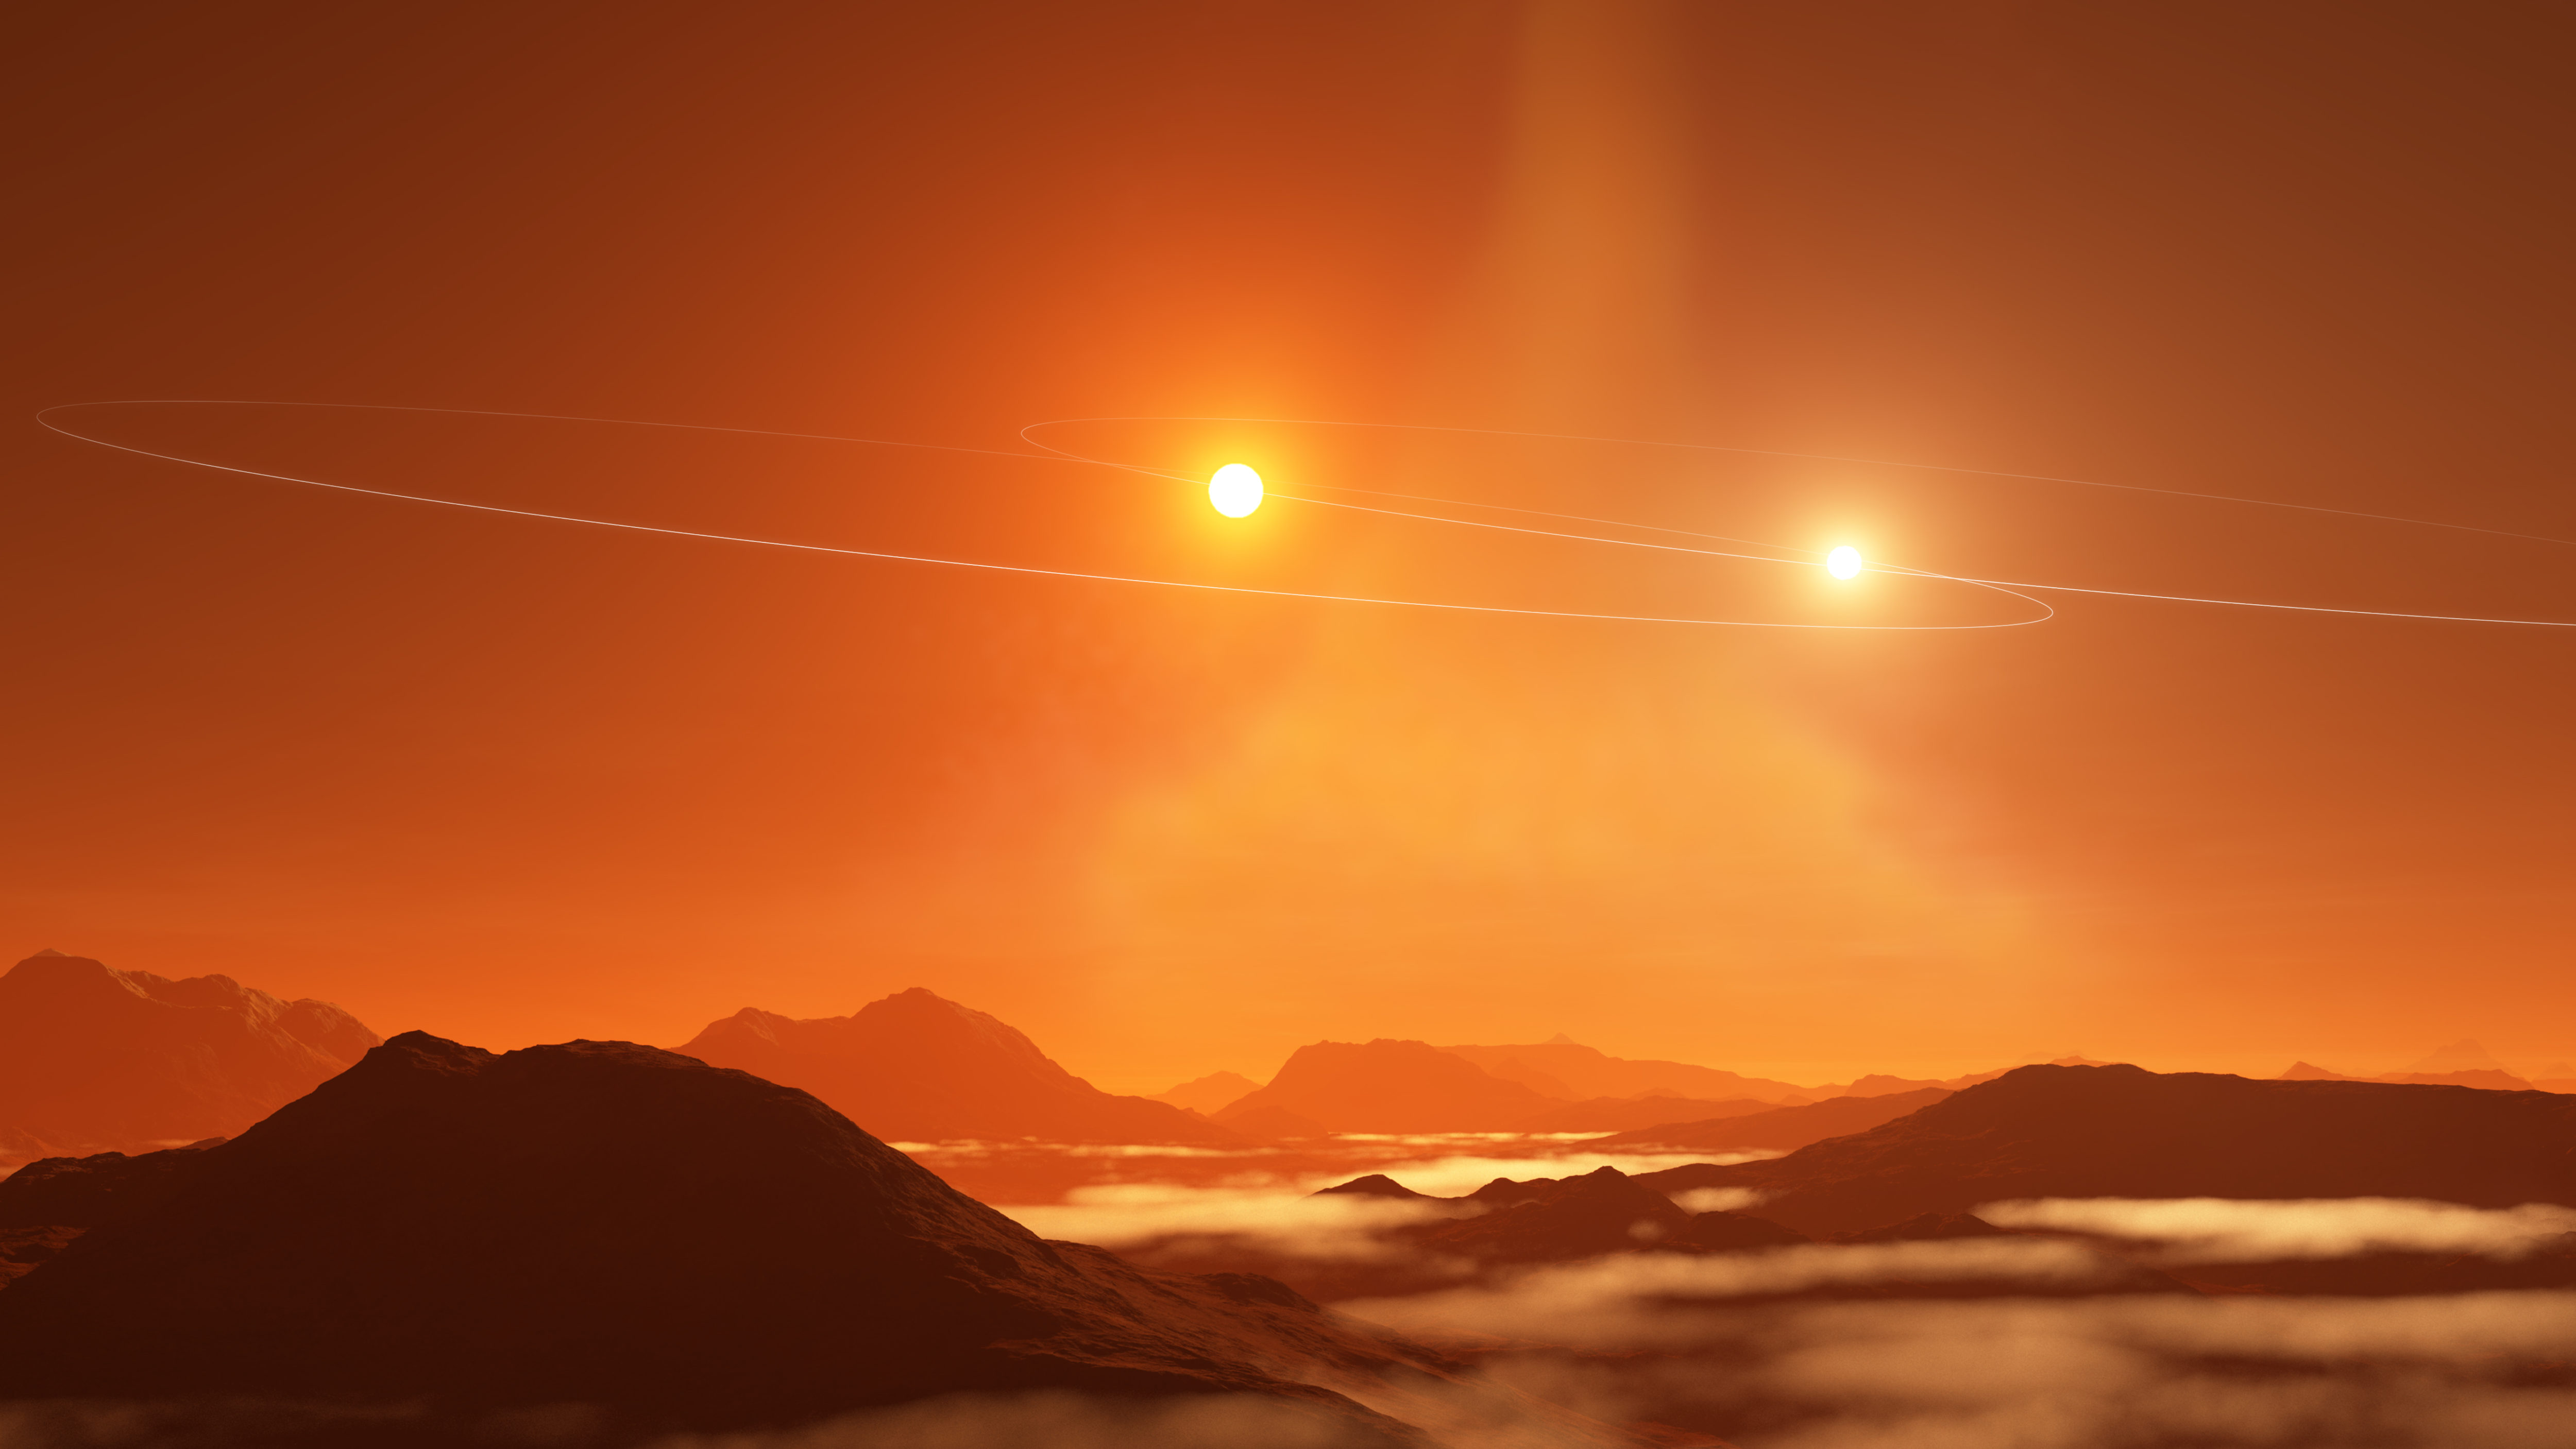 Artist impression of a double sunset on a 'Tatooine' exoplanet forming in a circumbinary disk that is misaligned with the orbits of its binary stars. Credit: NRAO/AUI/NSF, S. Dagnello.